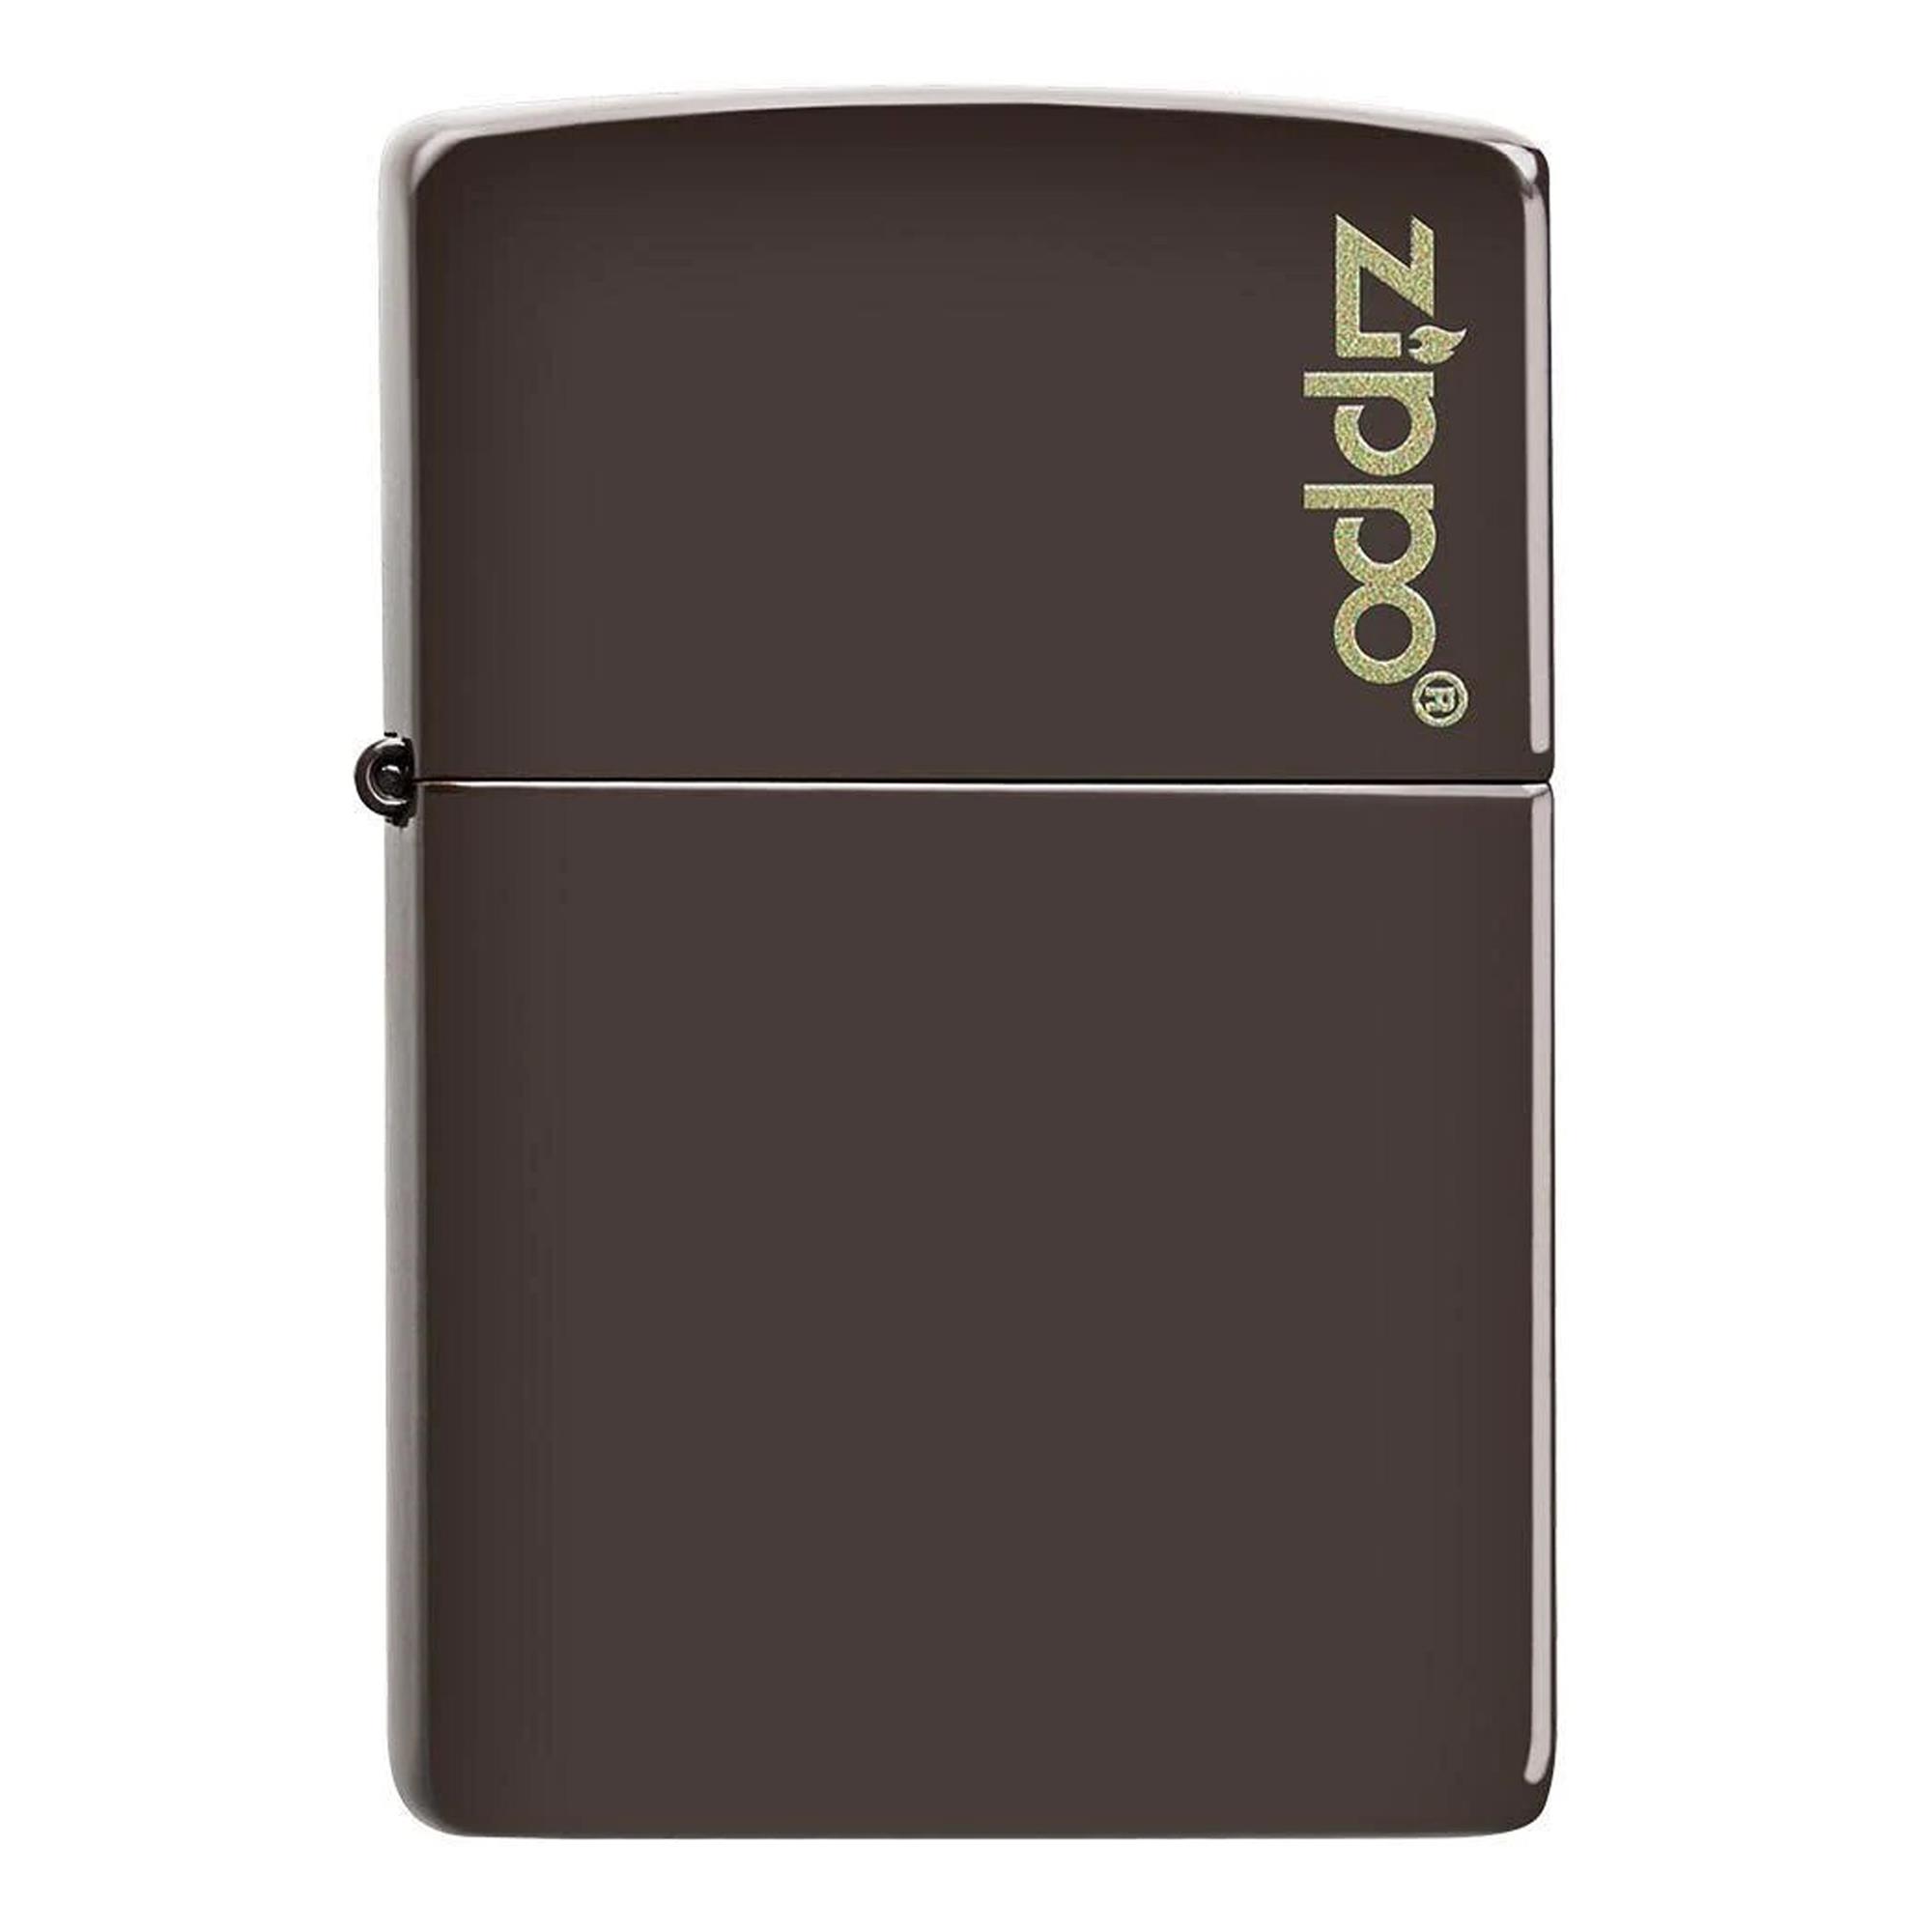 ZIPPO CLASSIC BROWN WITH LOGO